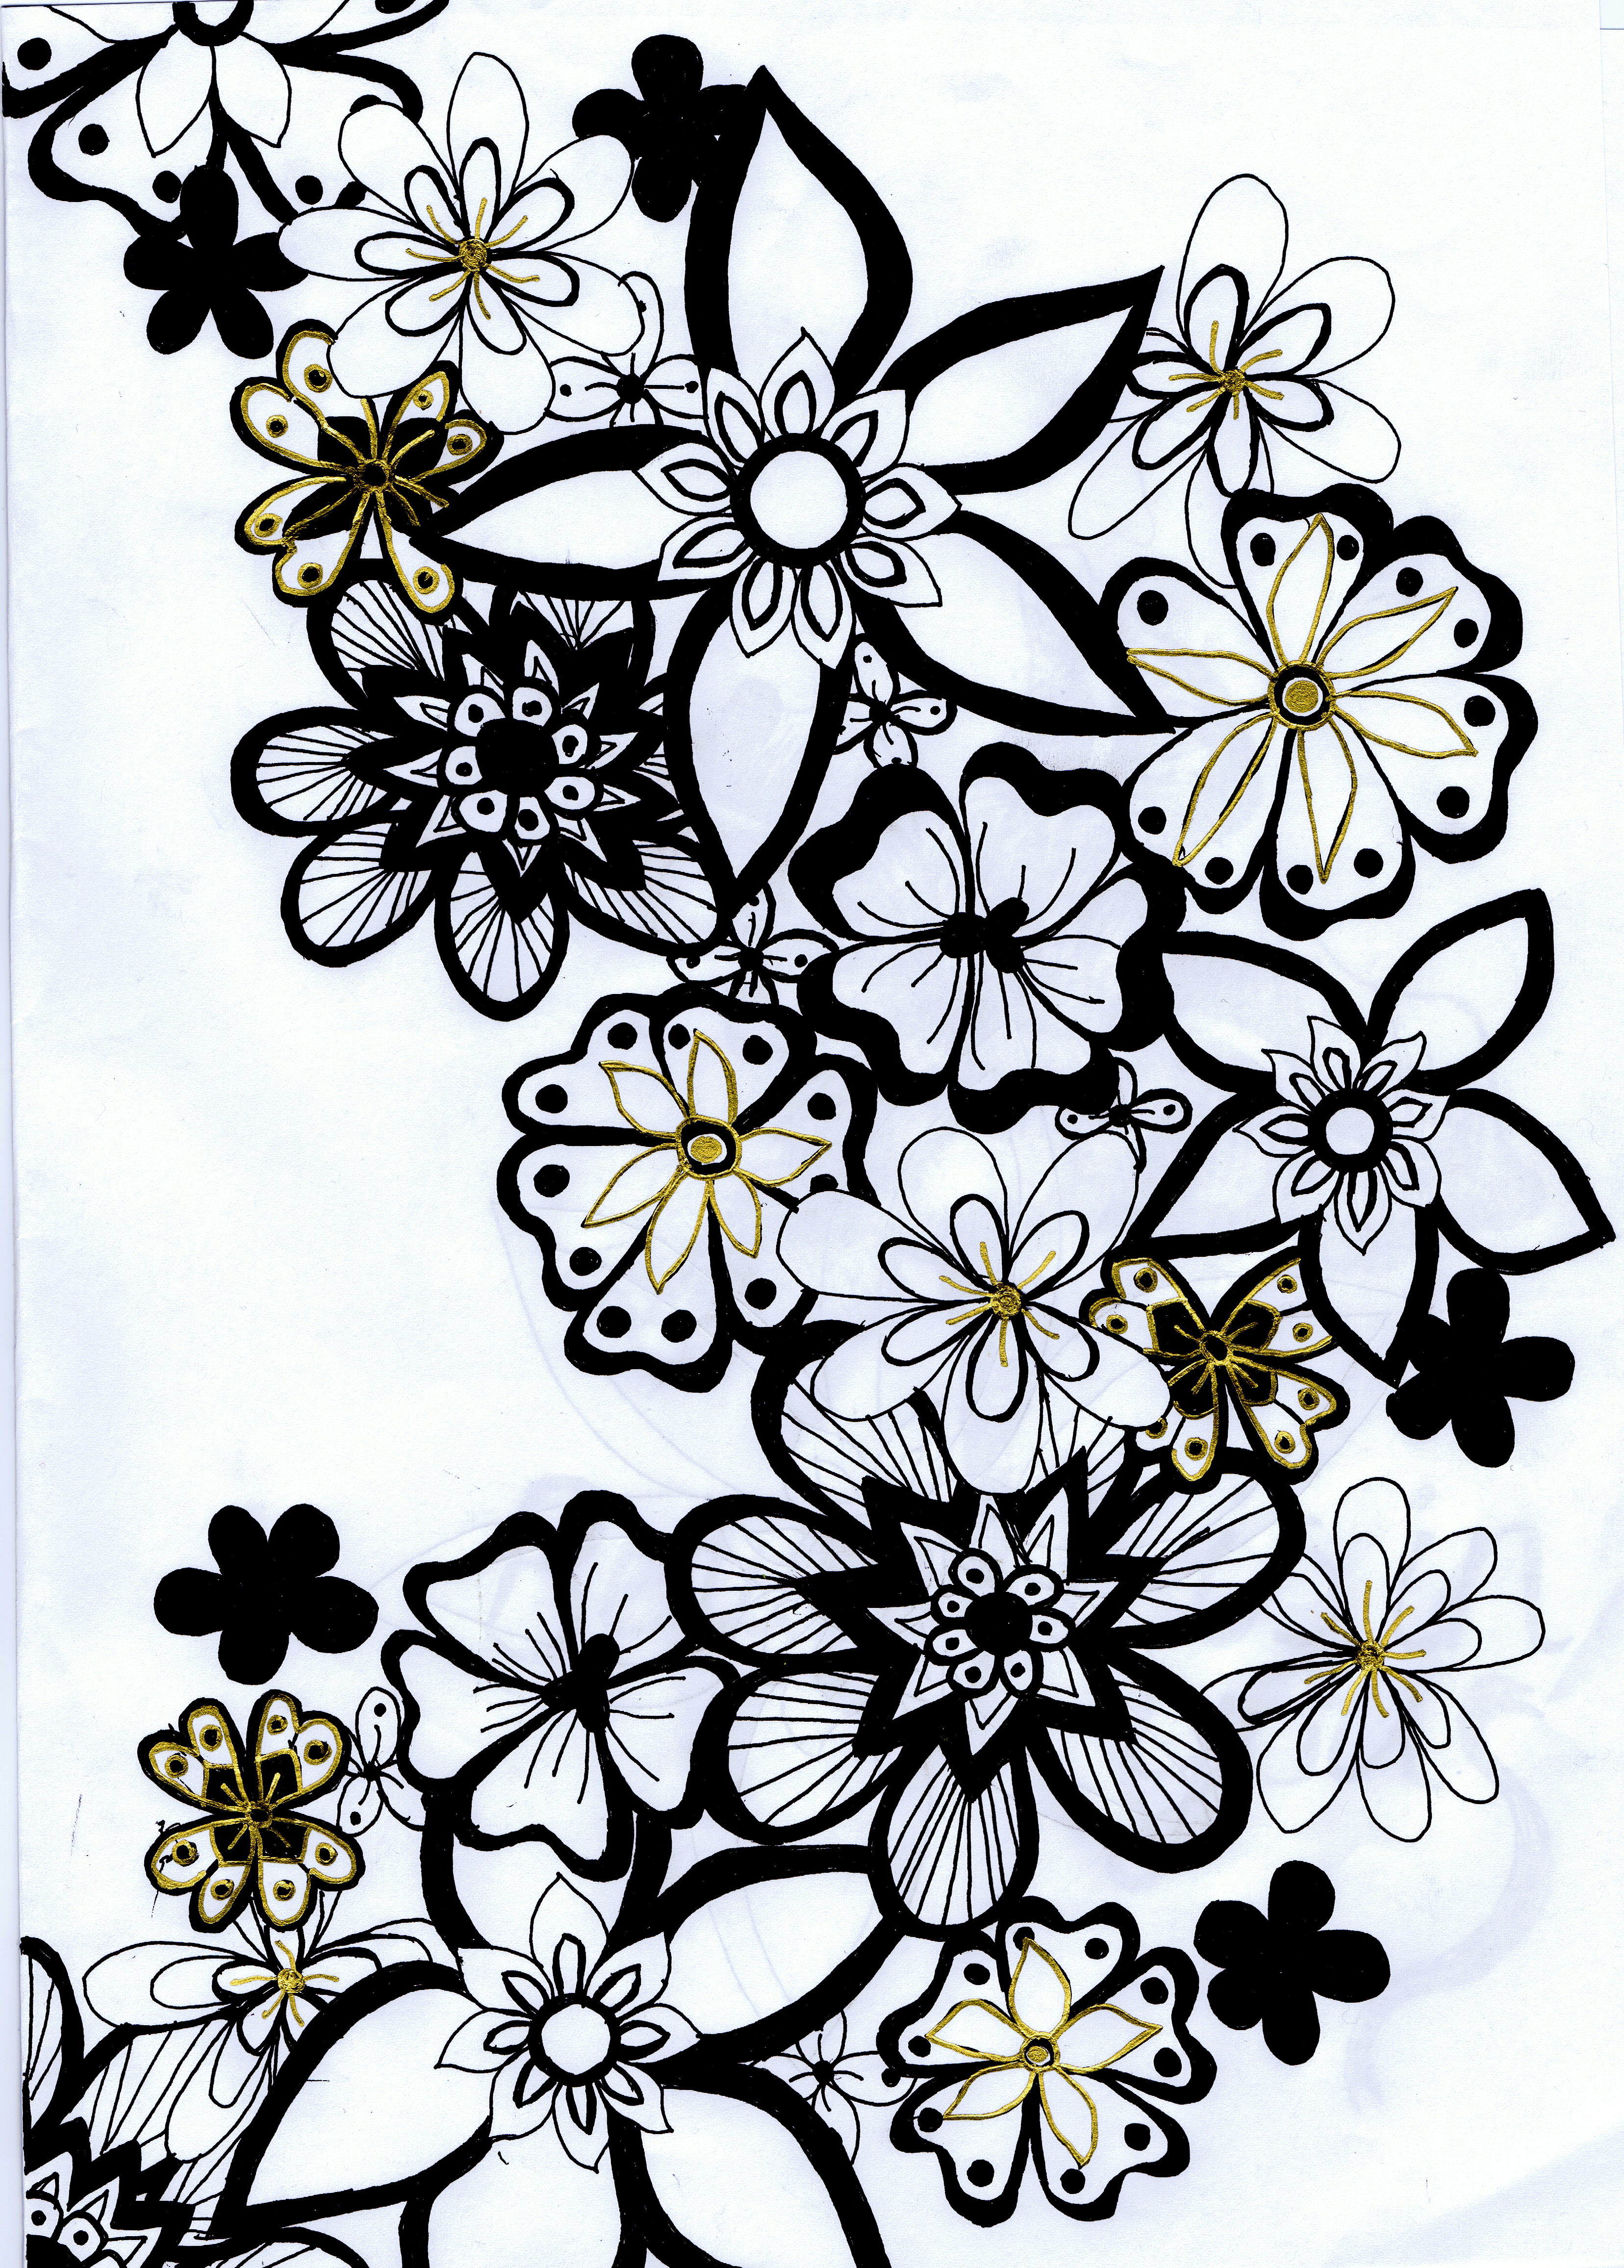 Black And White Flowers Drawings - Gallery